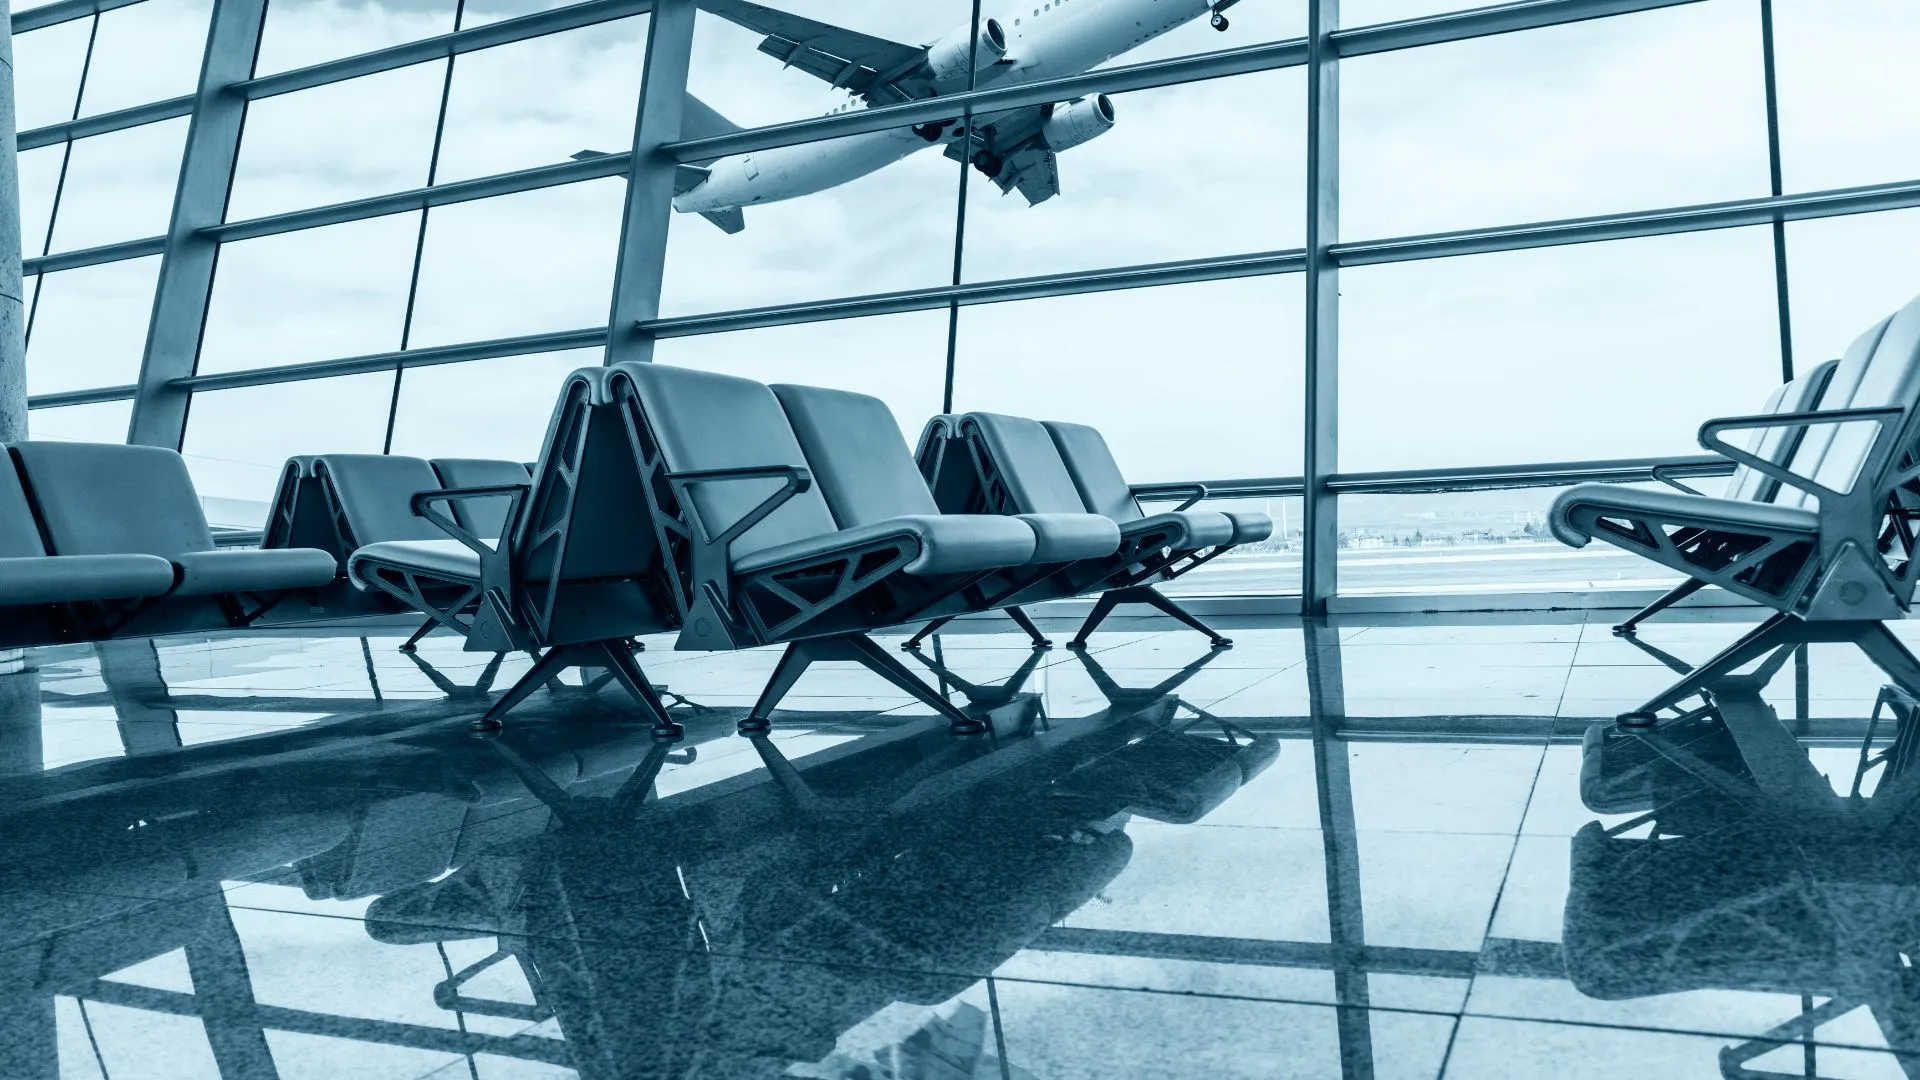 Blue-tinged shot of an airport waiting area, featuring a seated area overlooking the windows in the background of the shot, an airplane is taking off in the background